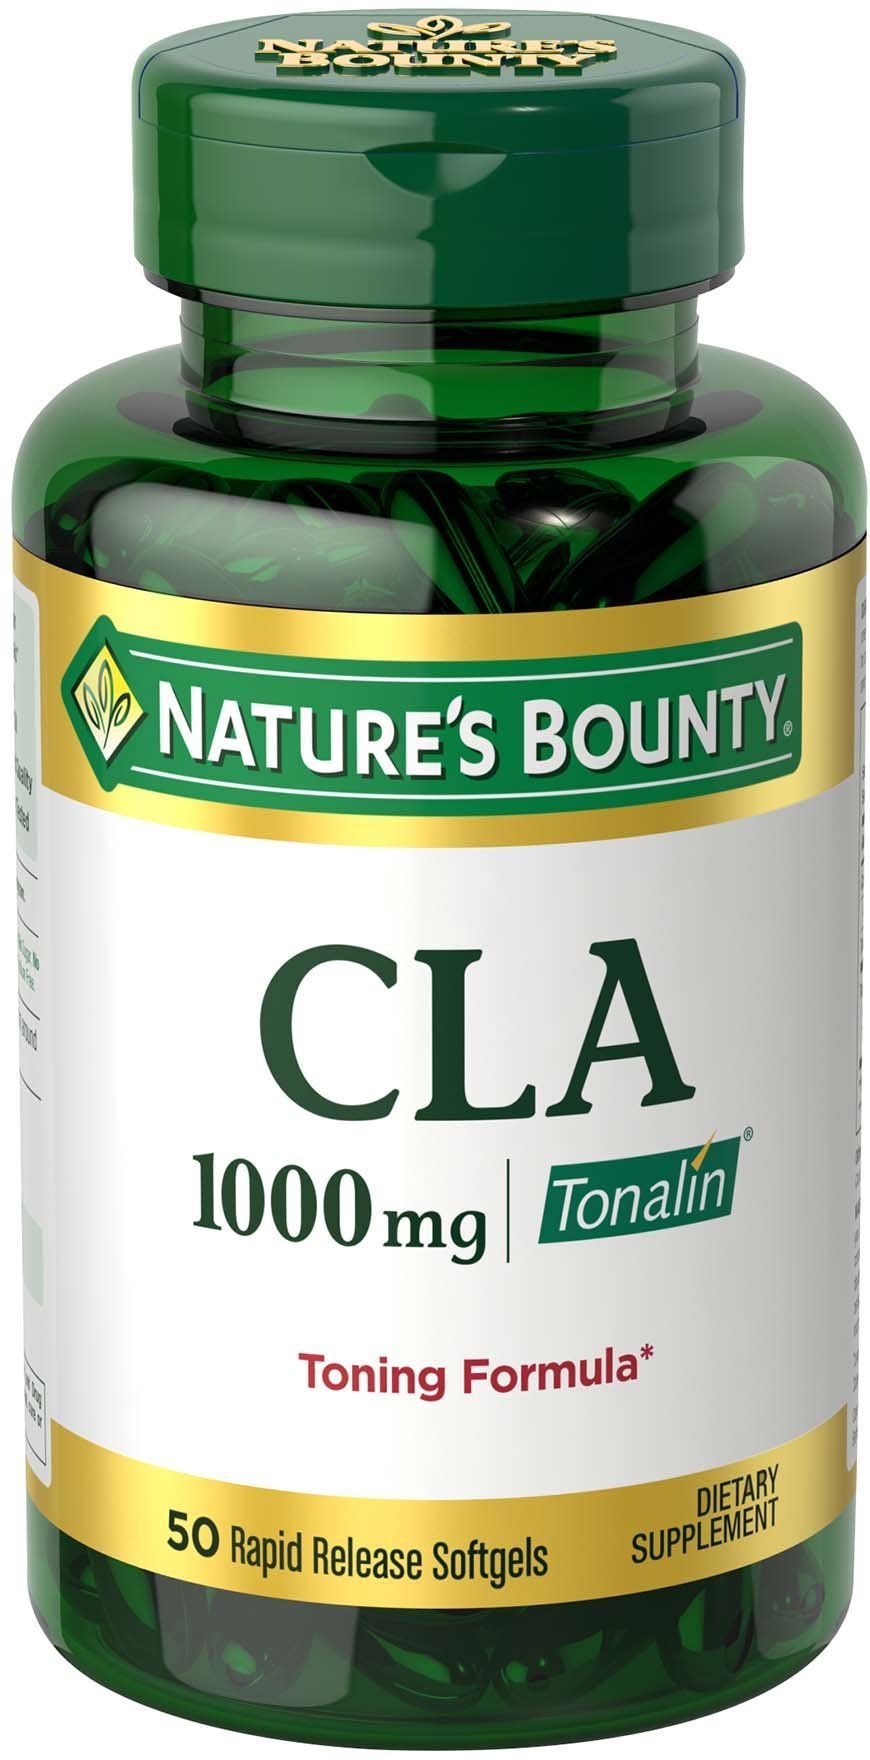 Nature's Bounty Tonalin Pills and Dietary Supplement, Diet and Body Support, 1000 mg, 50 Softgels - BeesActive Australia